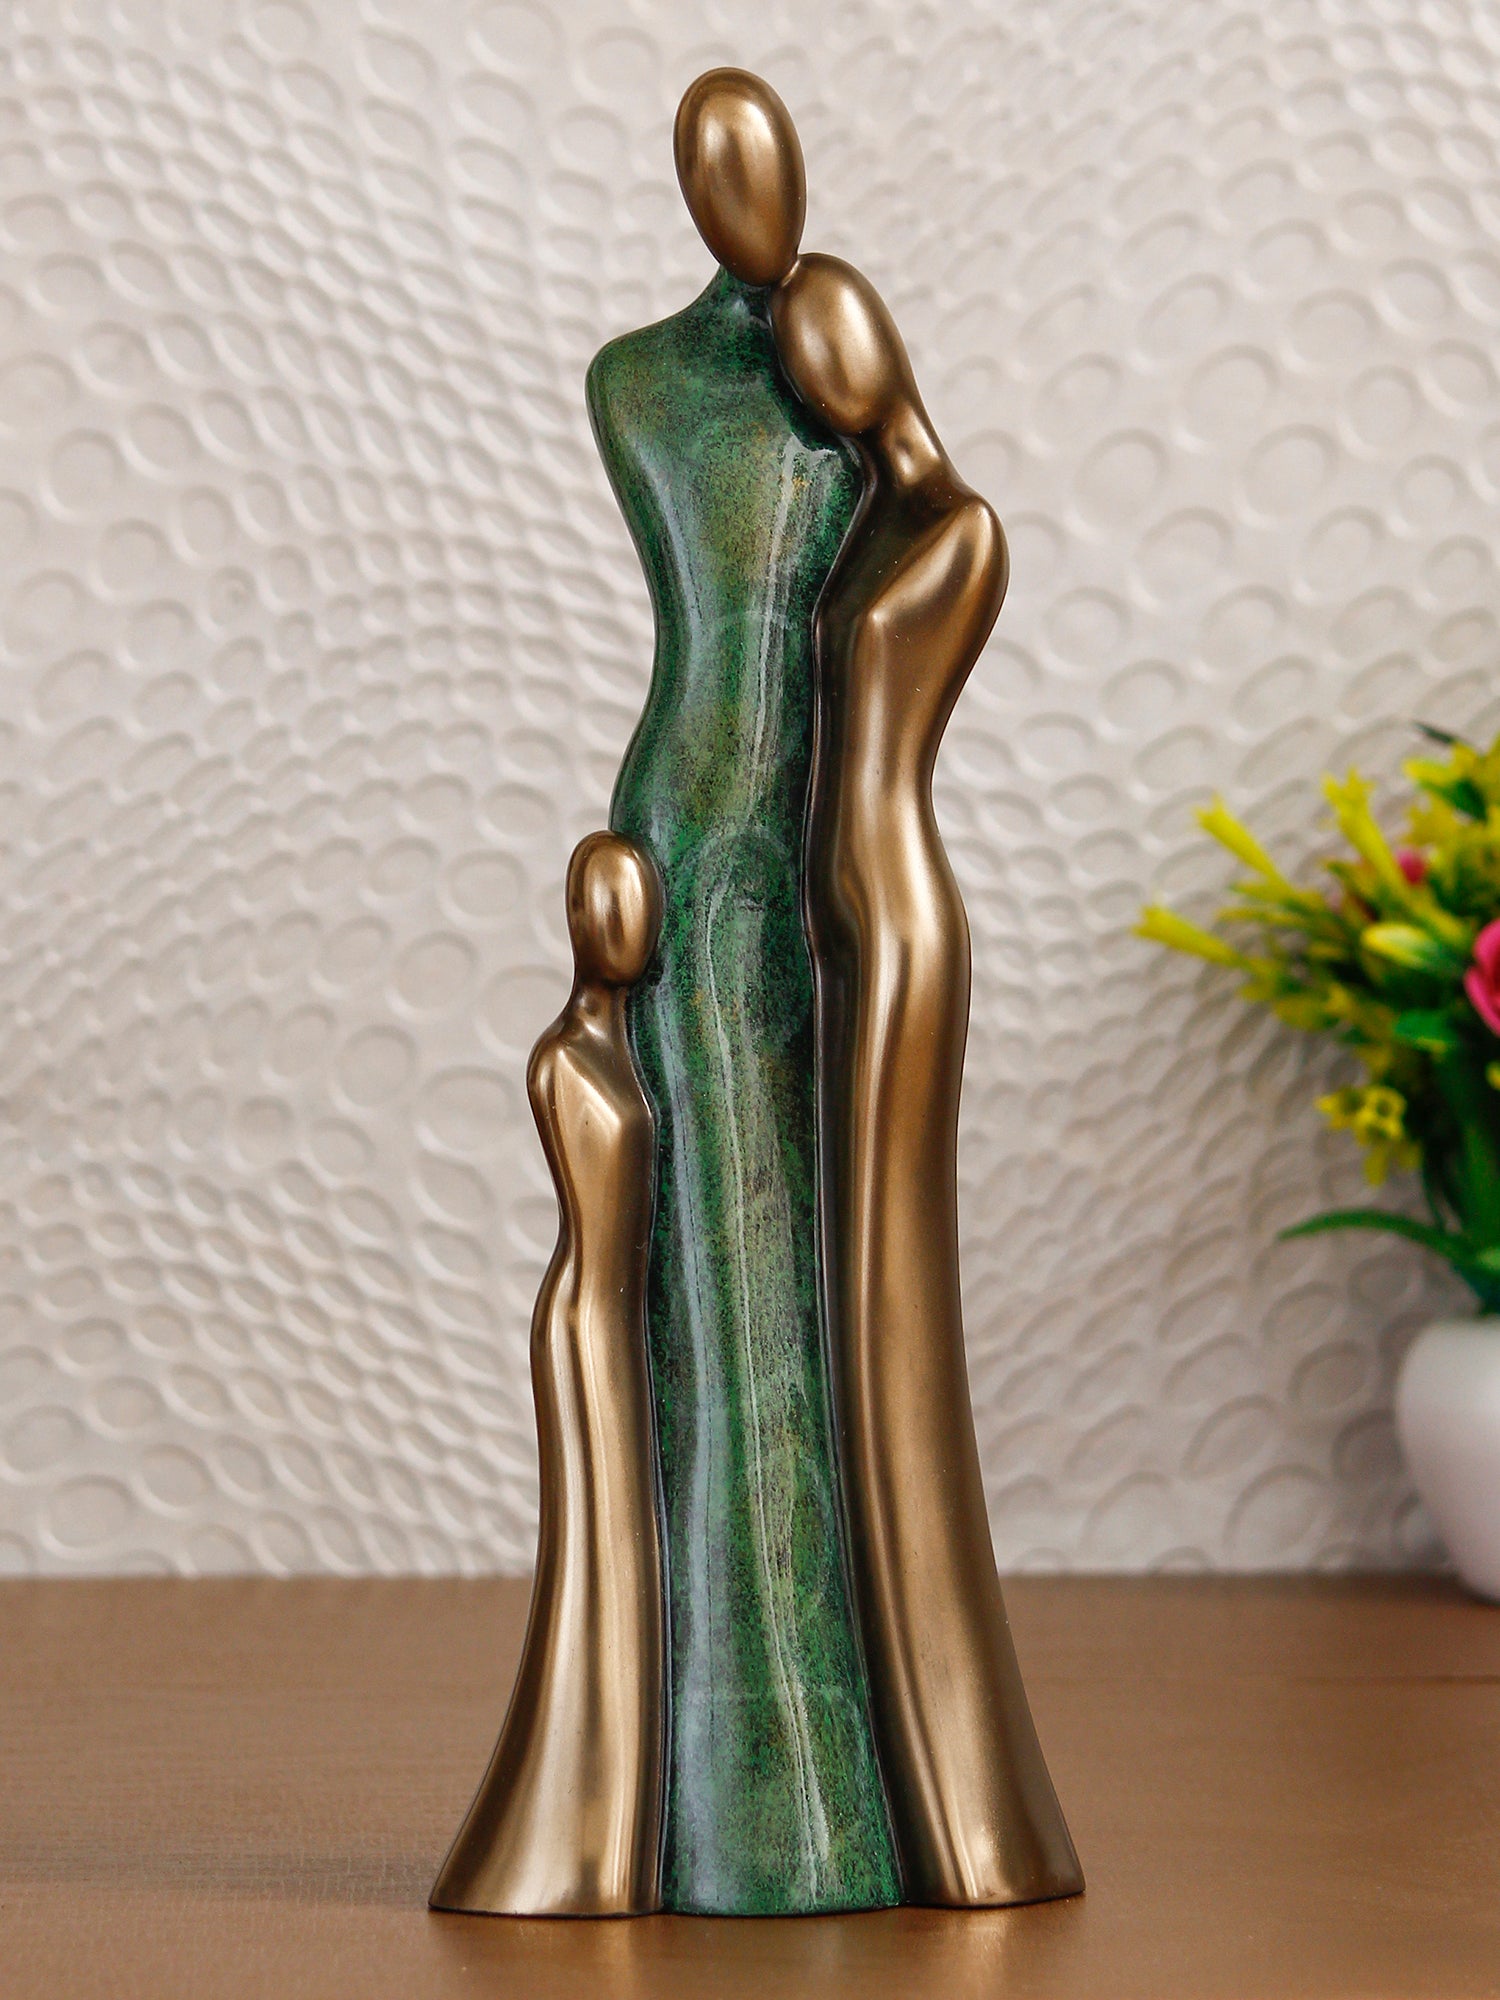 Polyresin and Bronze Family of Mother, Daughter and Grand Daughter Human Figurine Decorative Showpiece (Green and Brown)